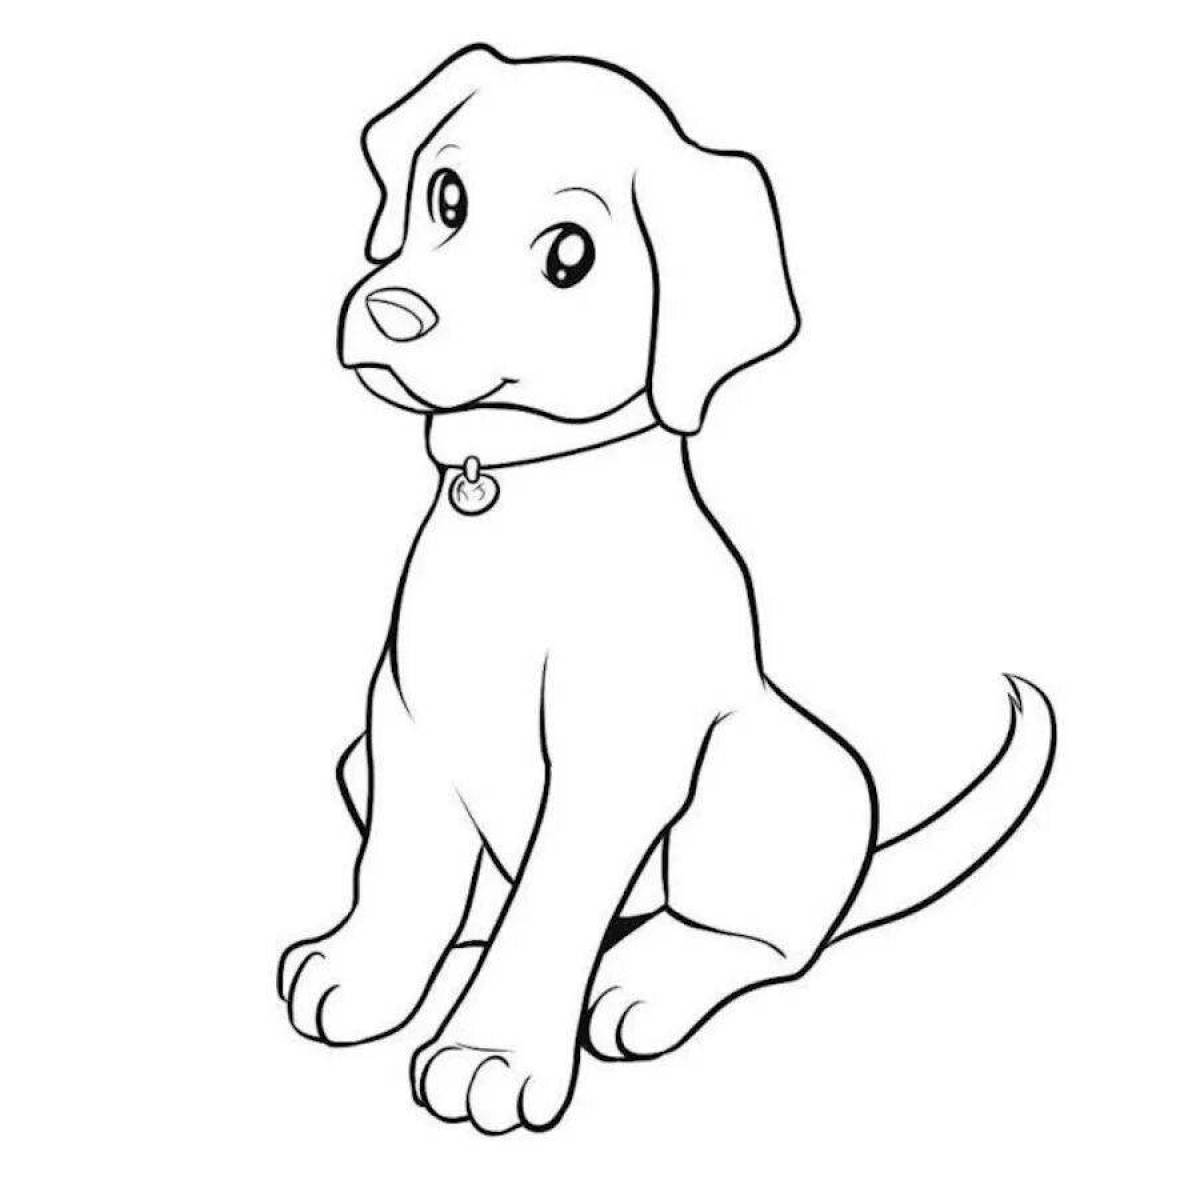 Fancy coloring drawing of a puppy